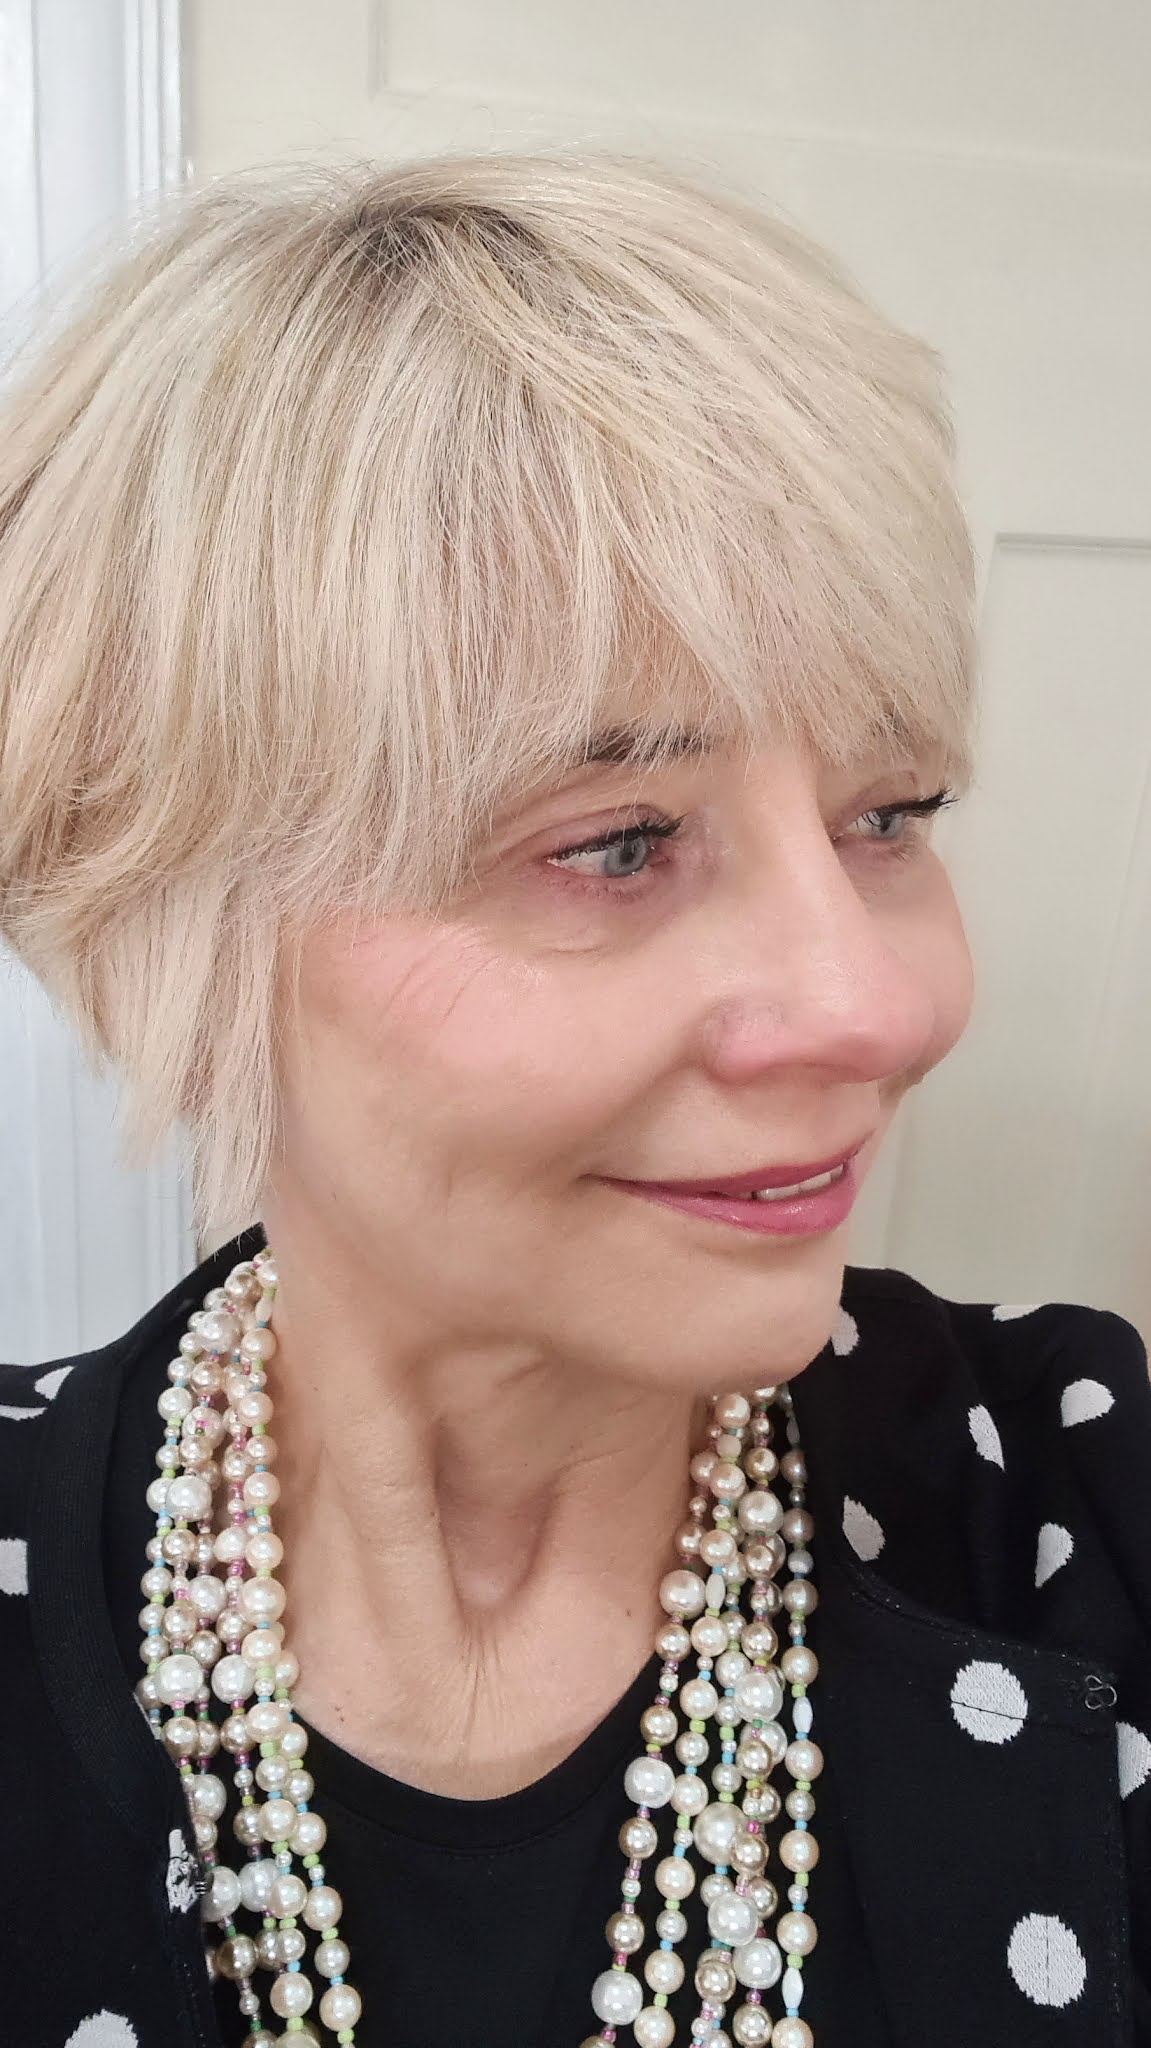 Close-up of the multi strand pearl necklace worn by Is This Mutton's Gail Hanlon. The necklace is from Bijou Rebooted, a Canterbury company which makes new necklaces from old beads